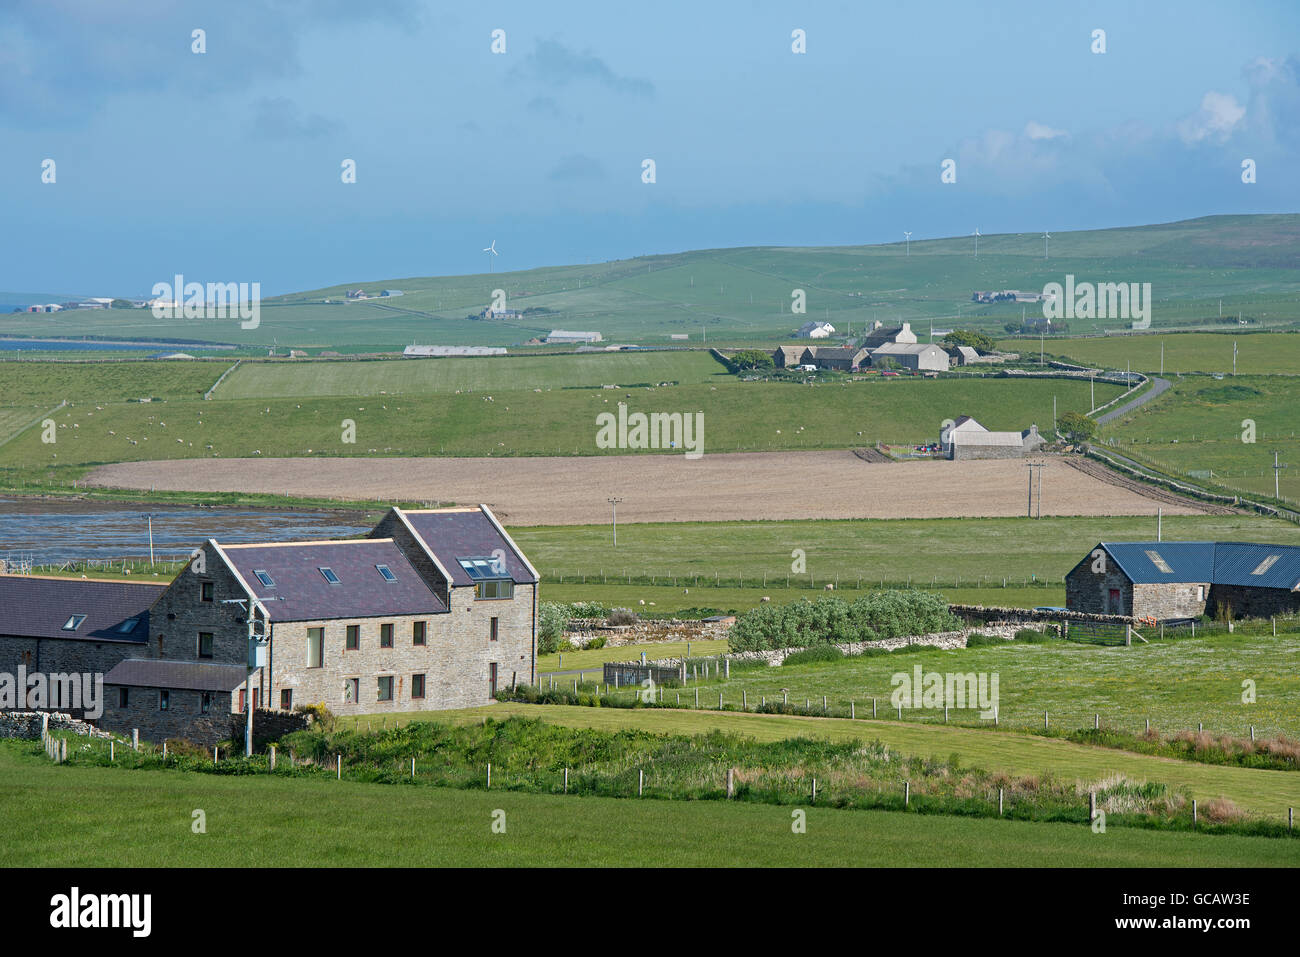 The open treeless agricultural landscape of the Orkney Isles. Stock Photo